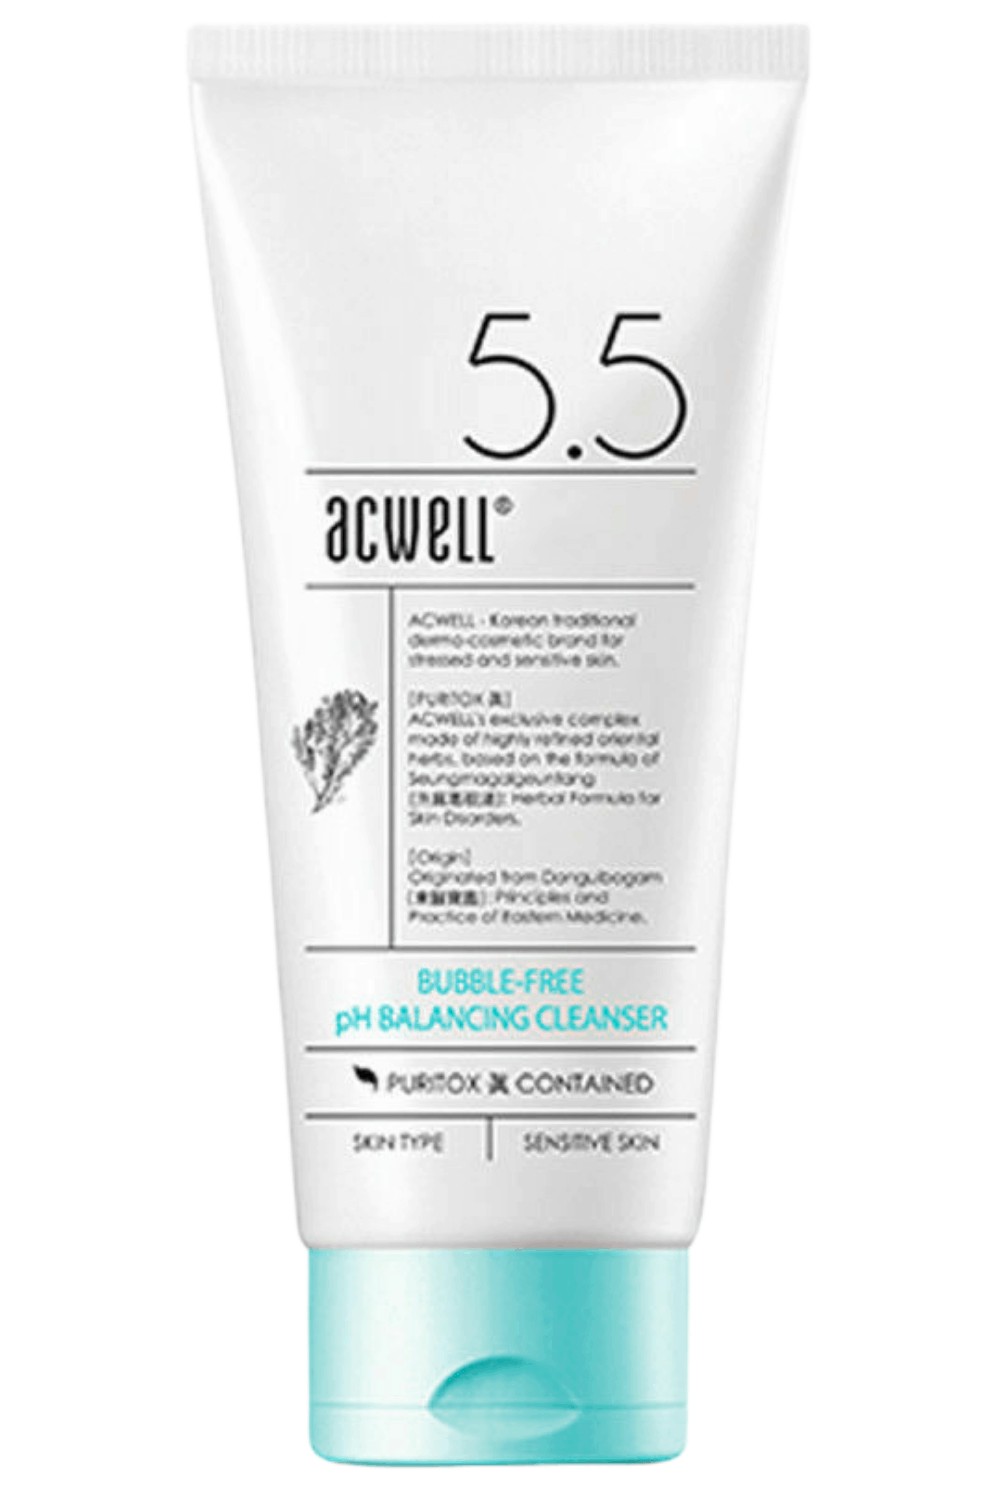 ACWELL Bubble Free pH Balancing Cleanser